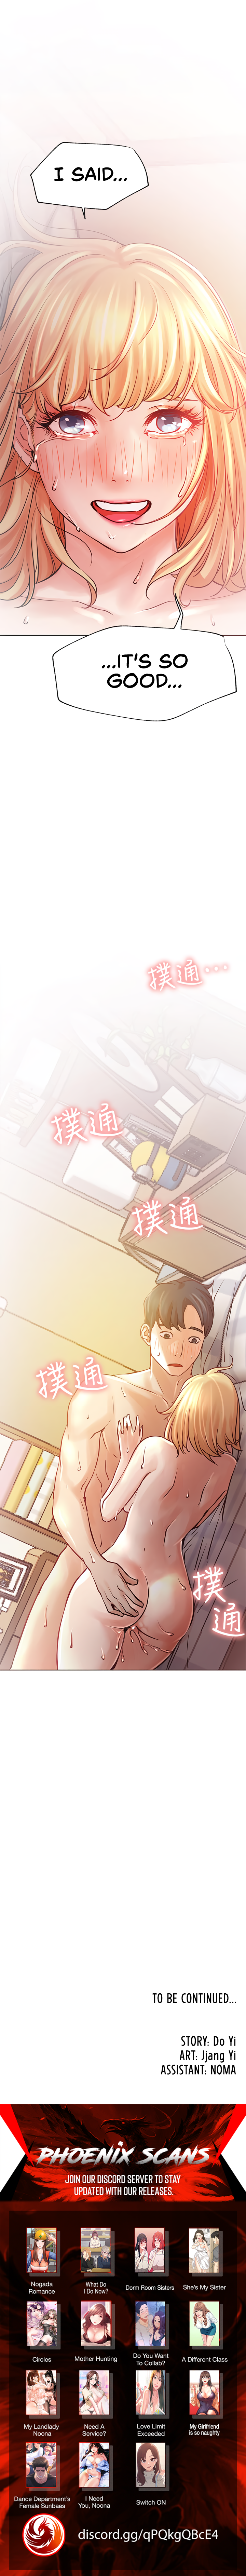 do-you-want-to-collab-chap-32-7